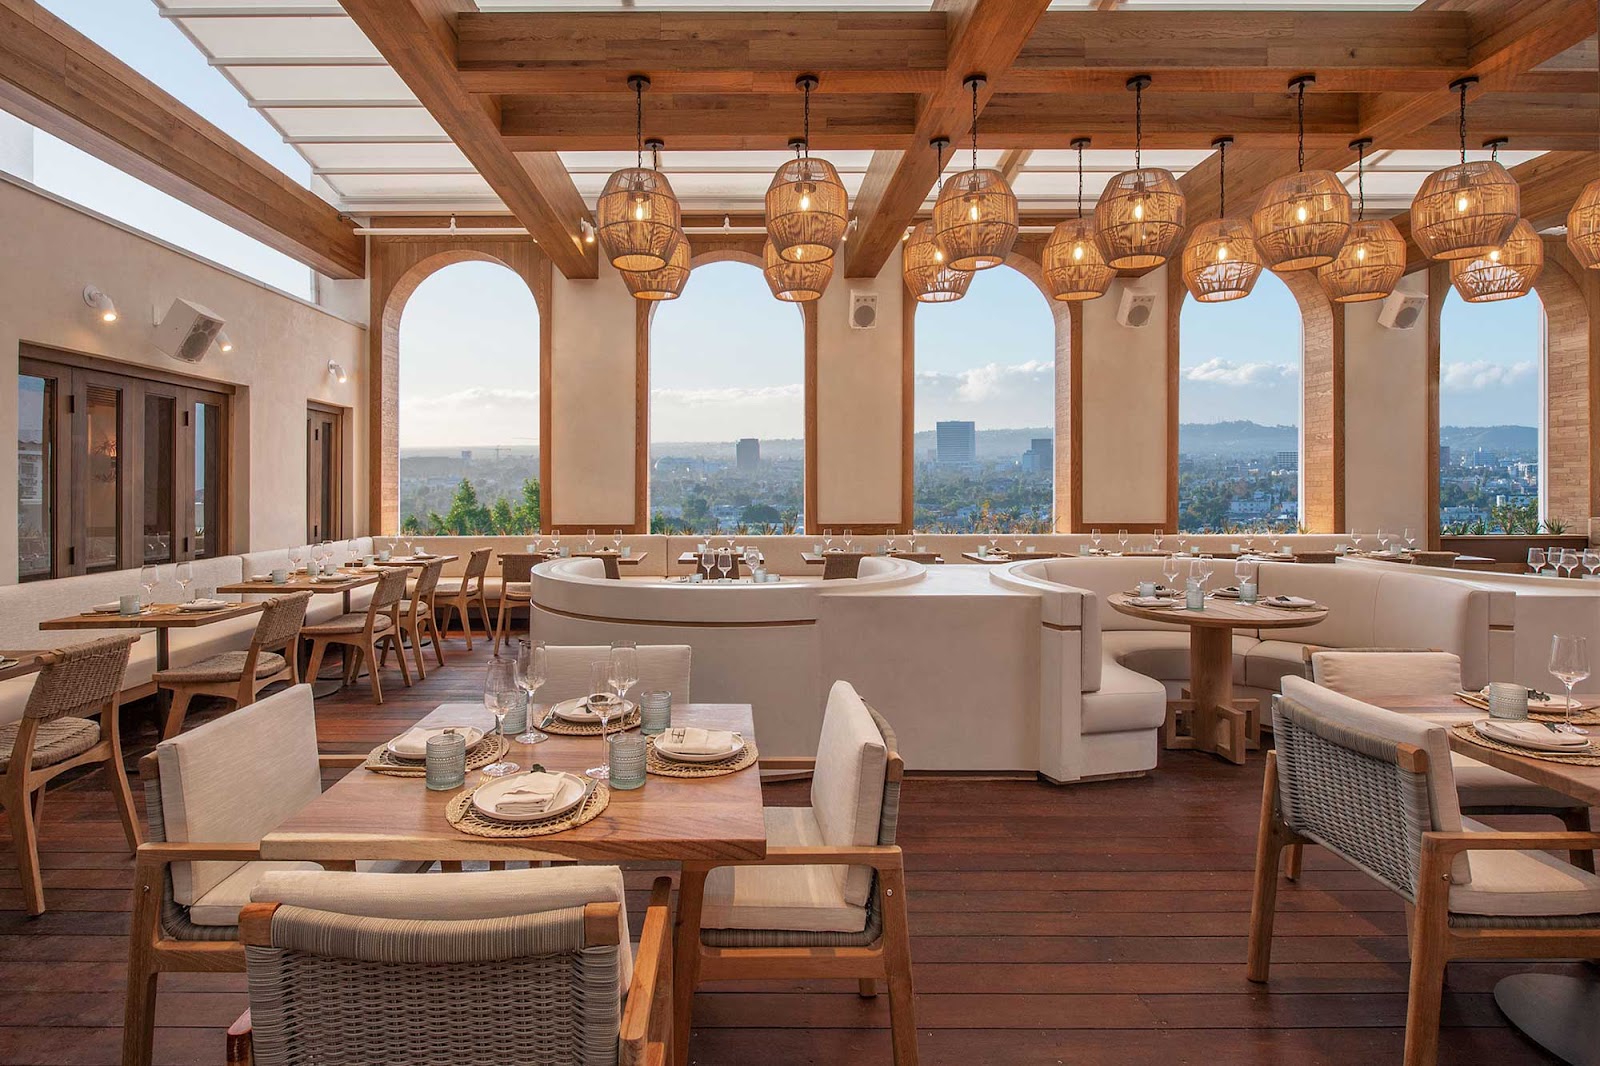 Interior of a restaurant with white-and-wood furniture and large, arched windows looking out over Los Angeles. Casa Madera, West Hollywood, California.